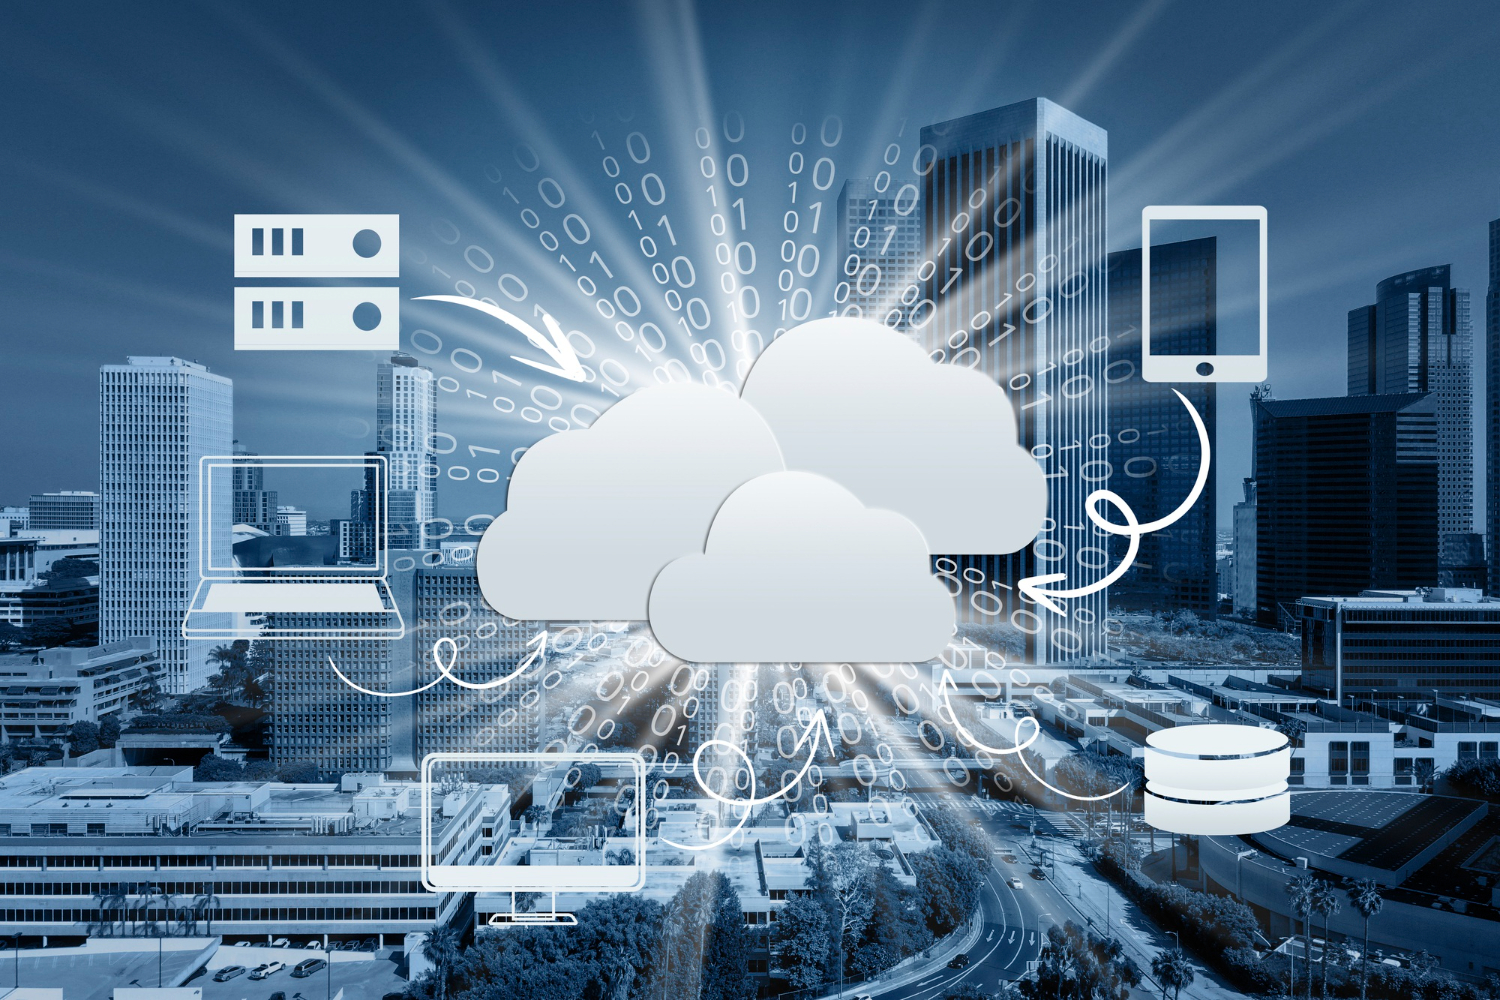 Urban skyline with cloud computing and data icons illustrating a networked cityscape.